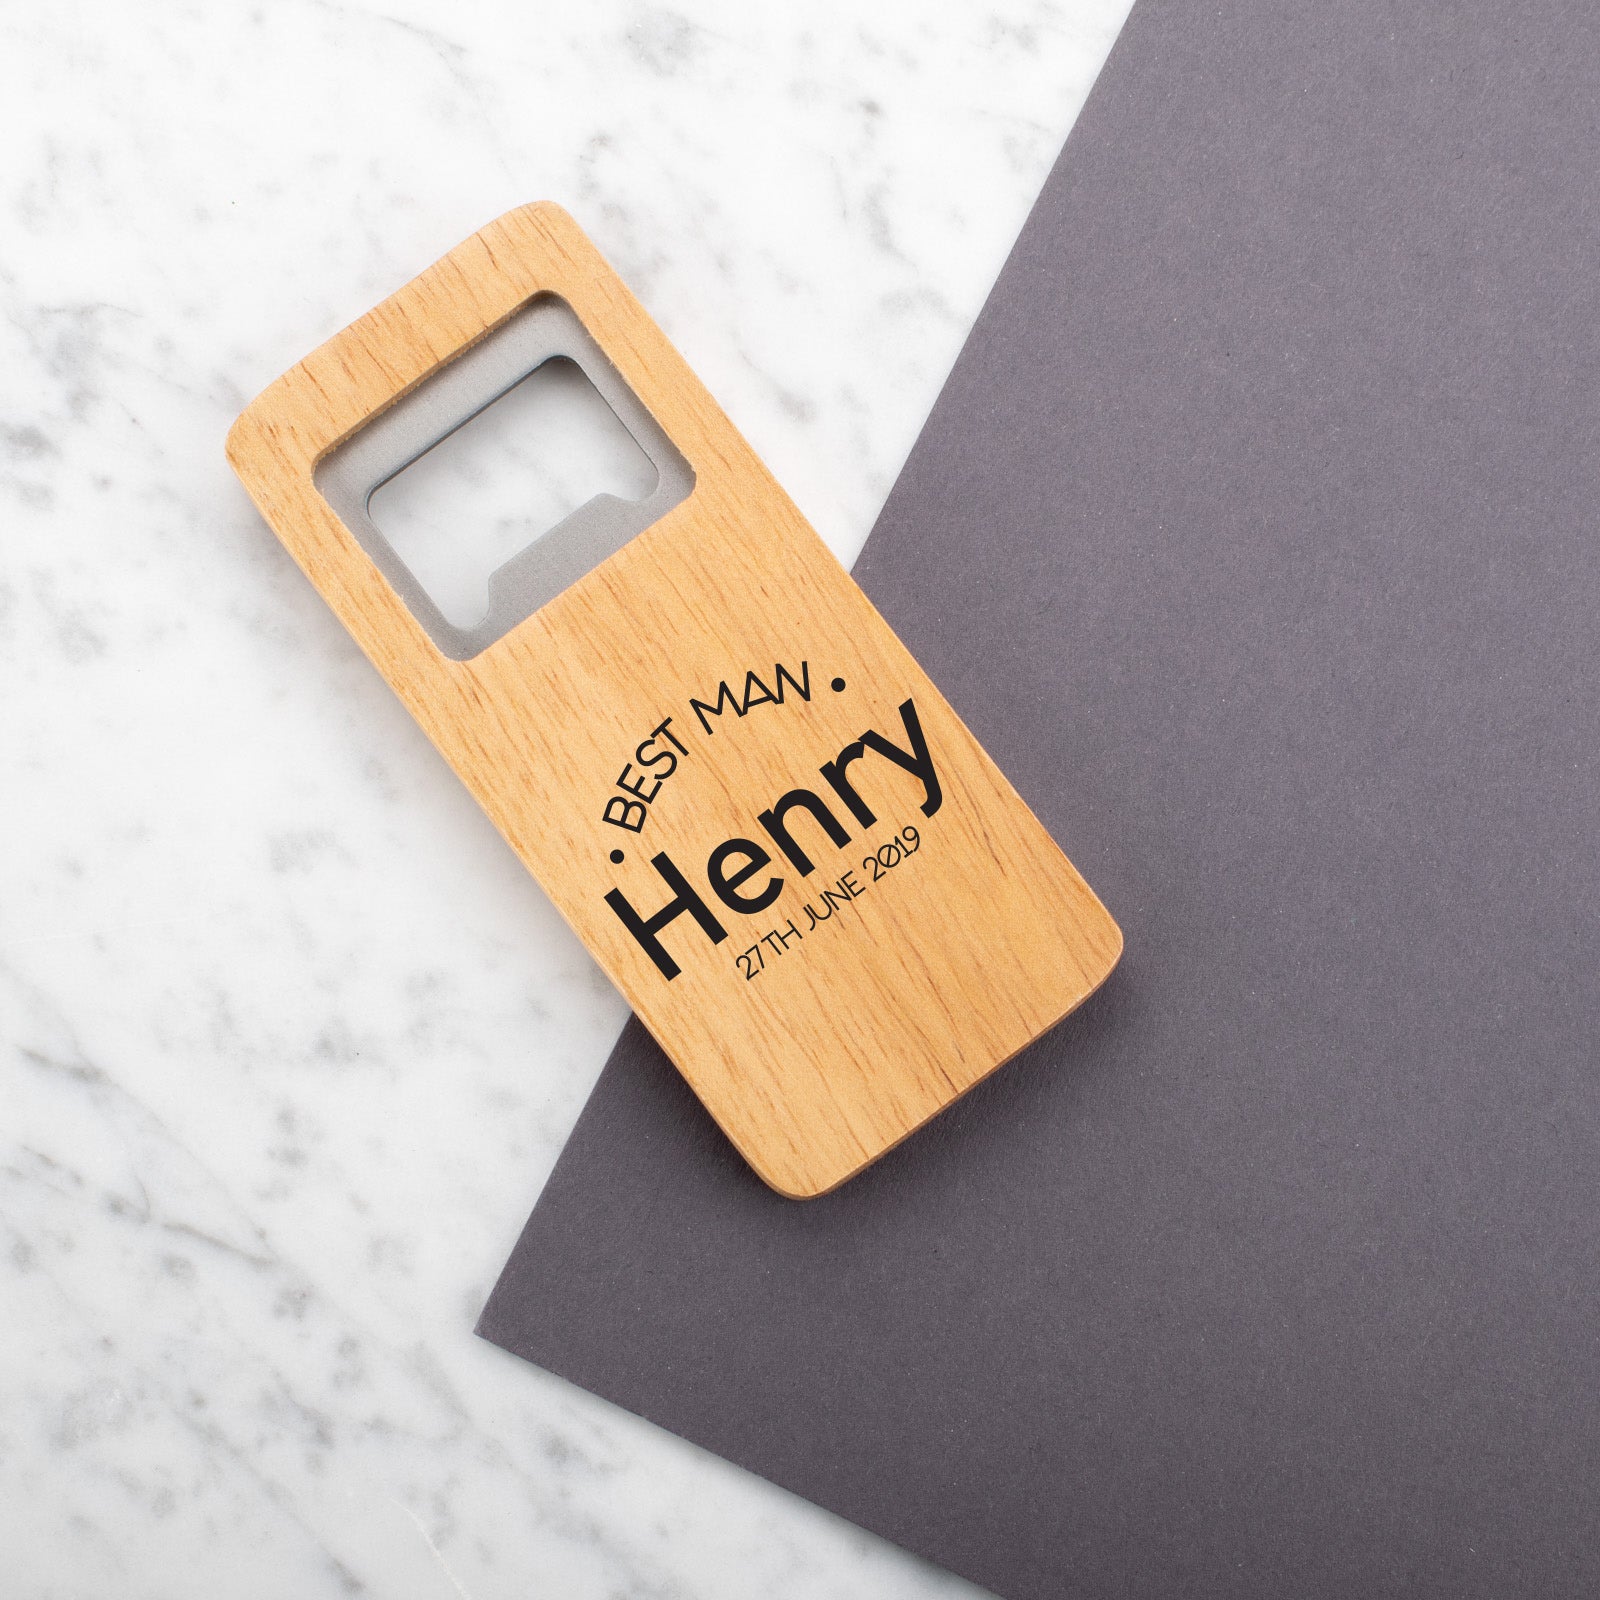 Personalised Engraved Wooden Bottle Opener Rectangle - Drink time!